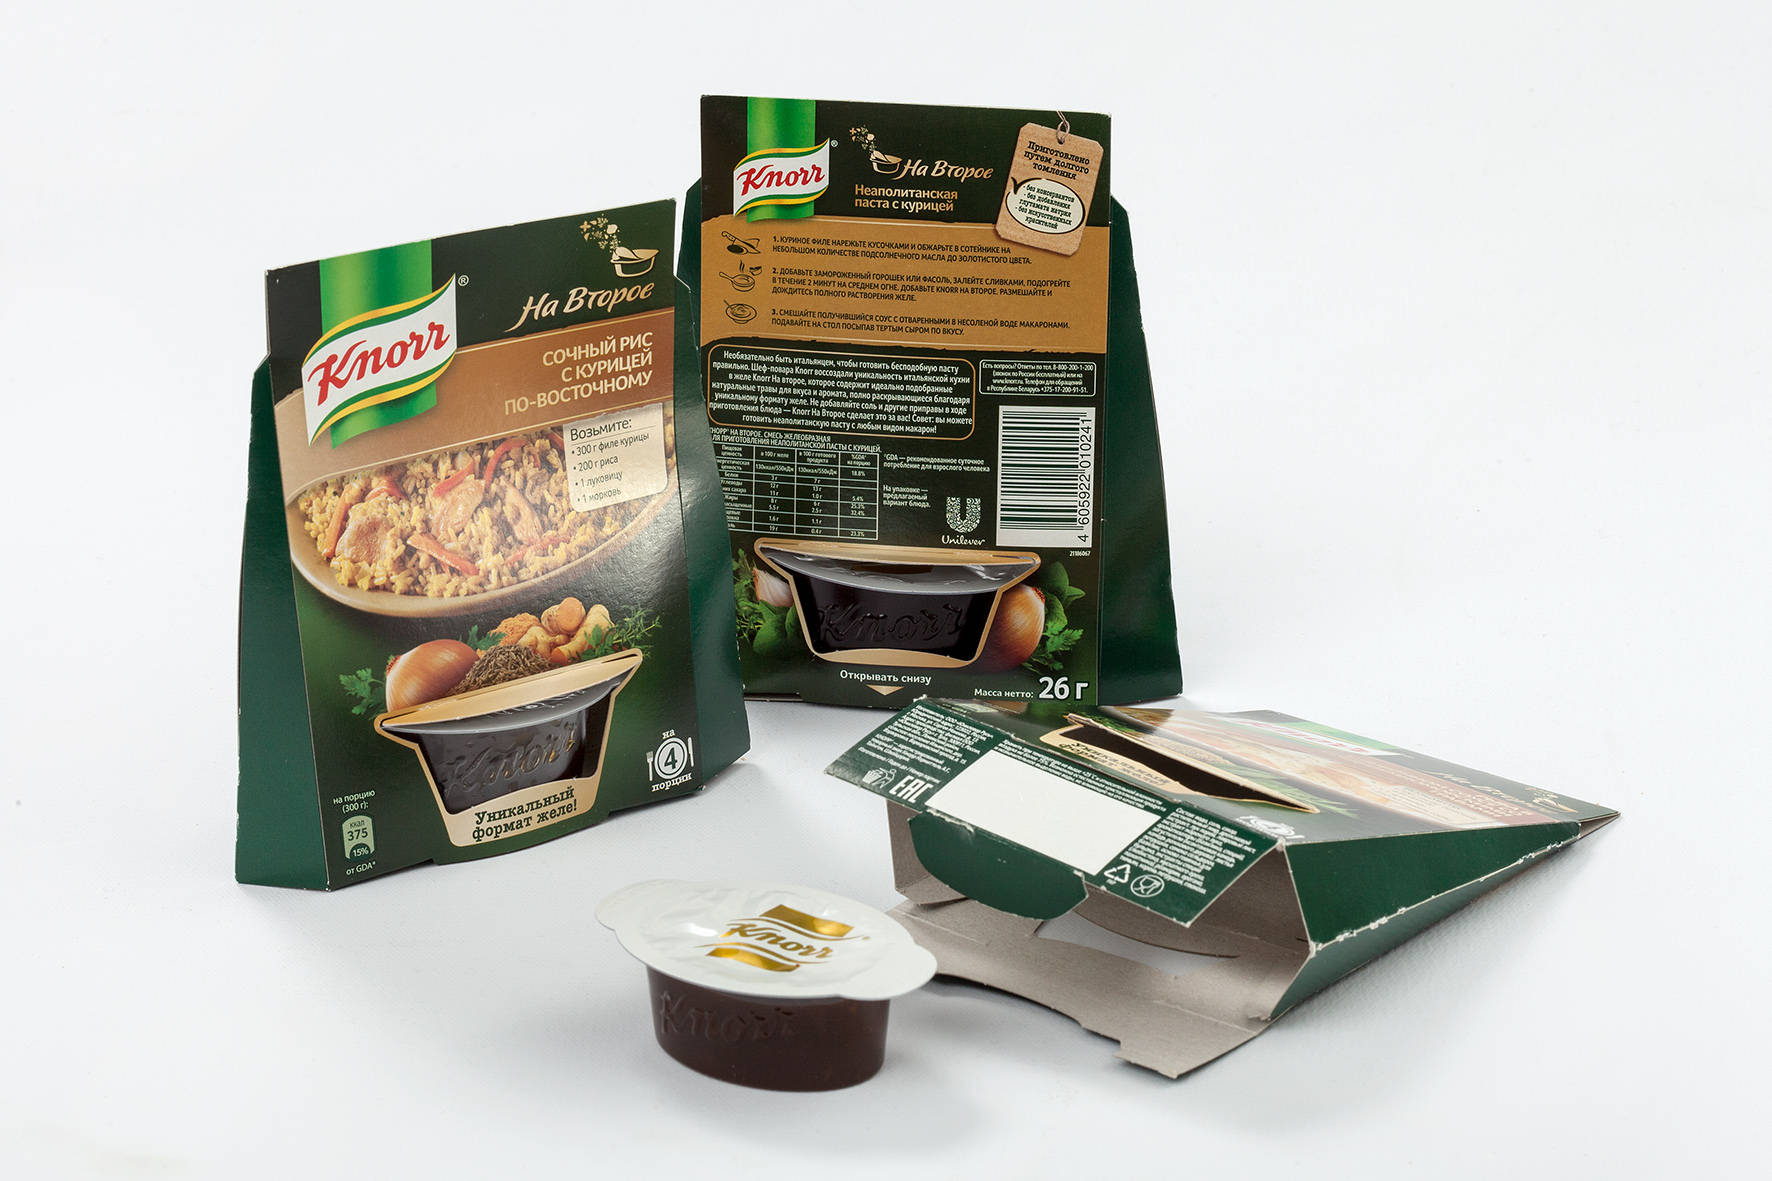 Knorr Main Course